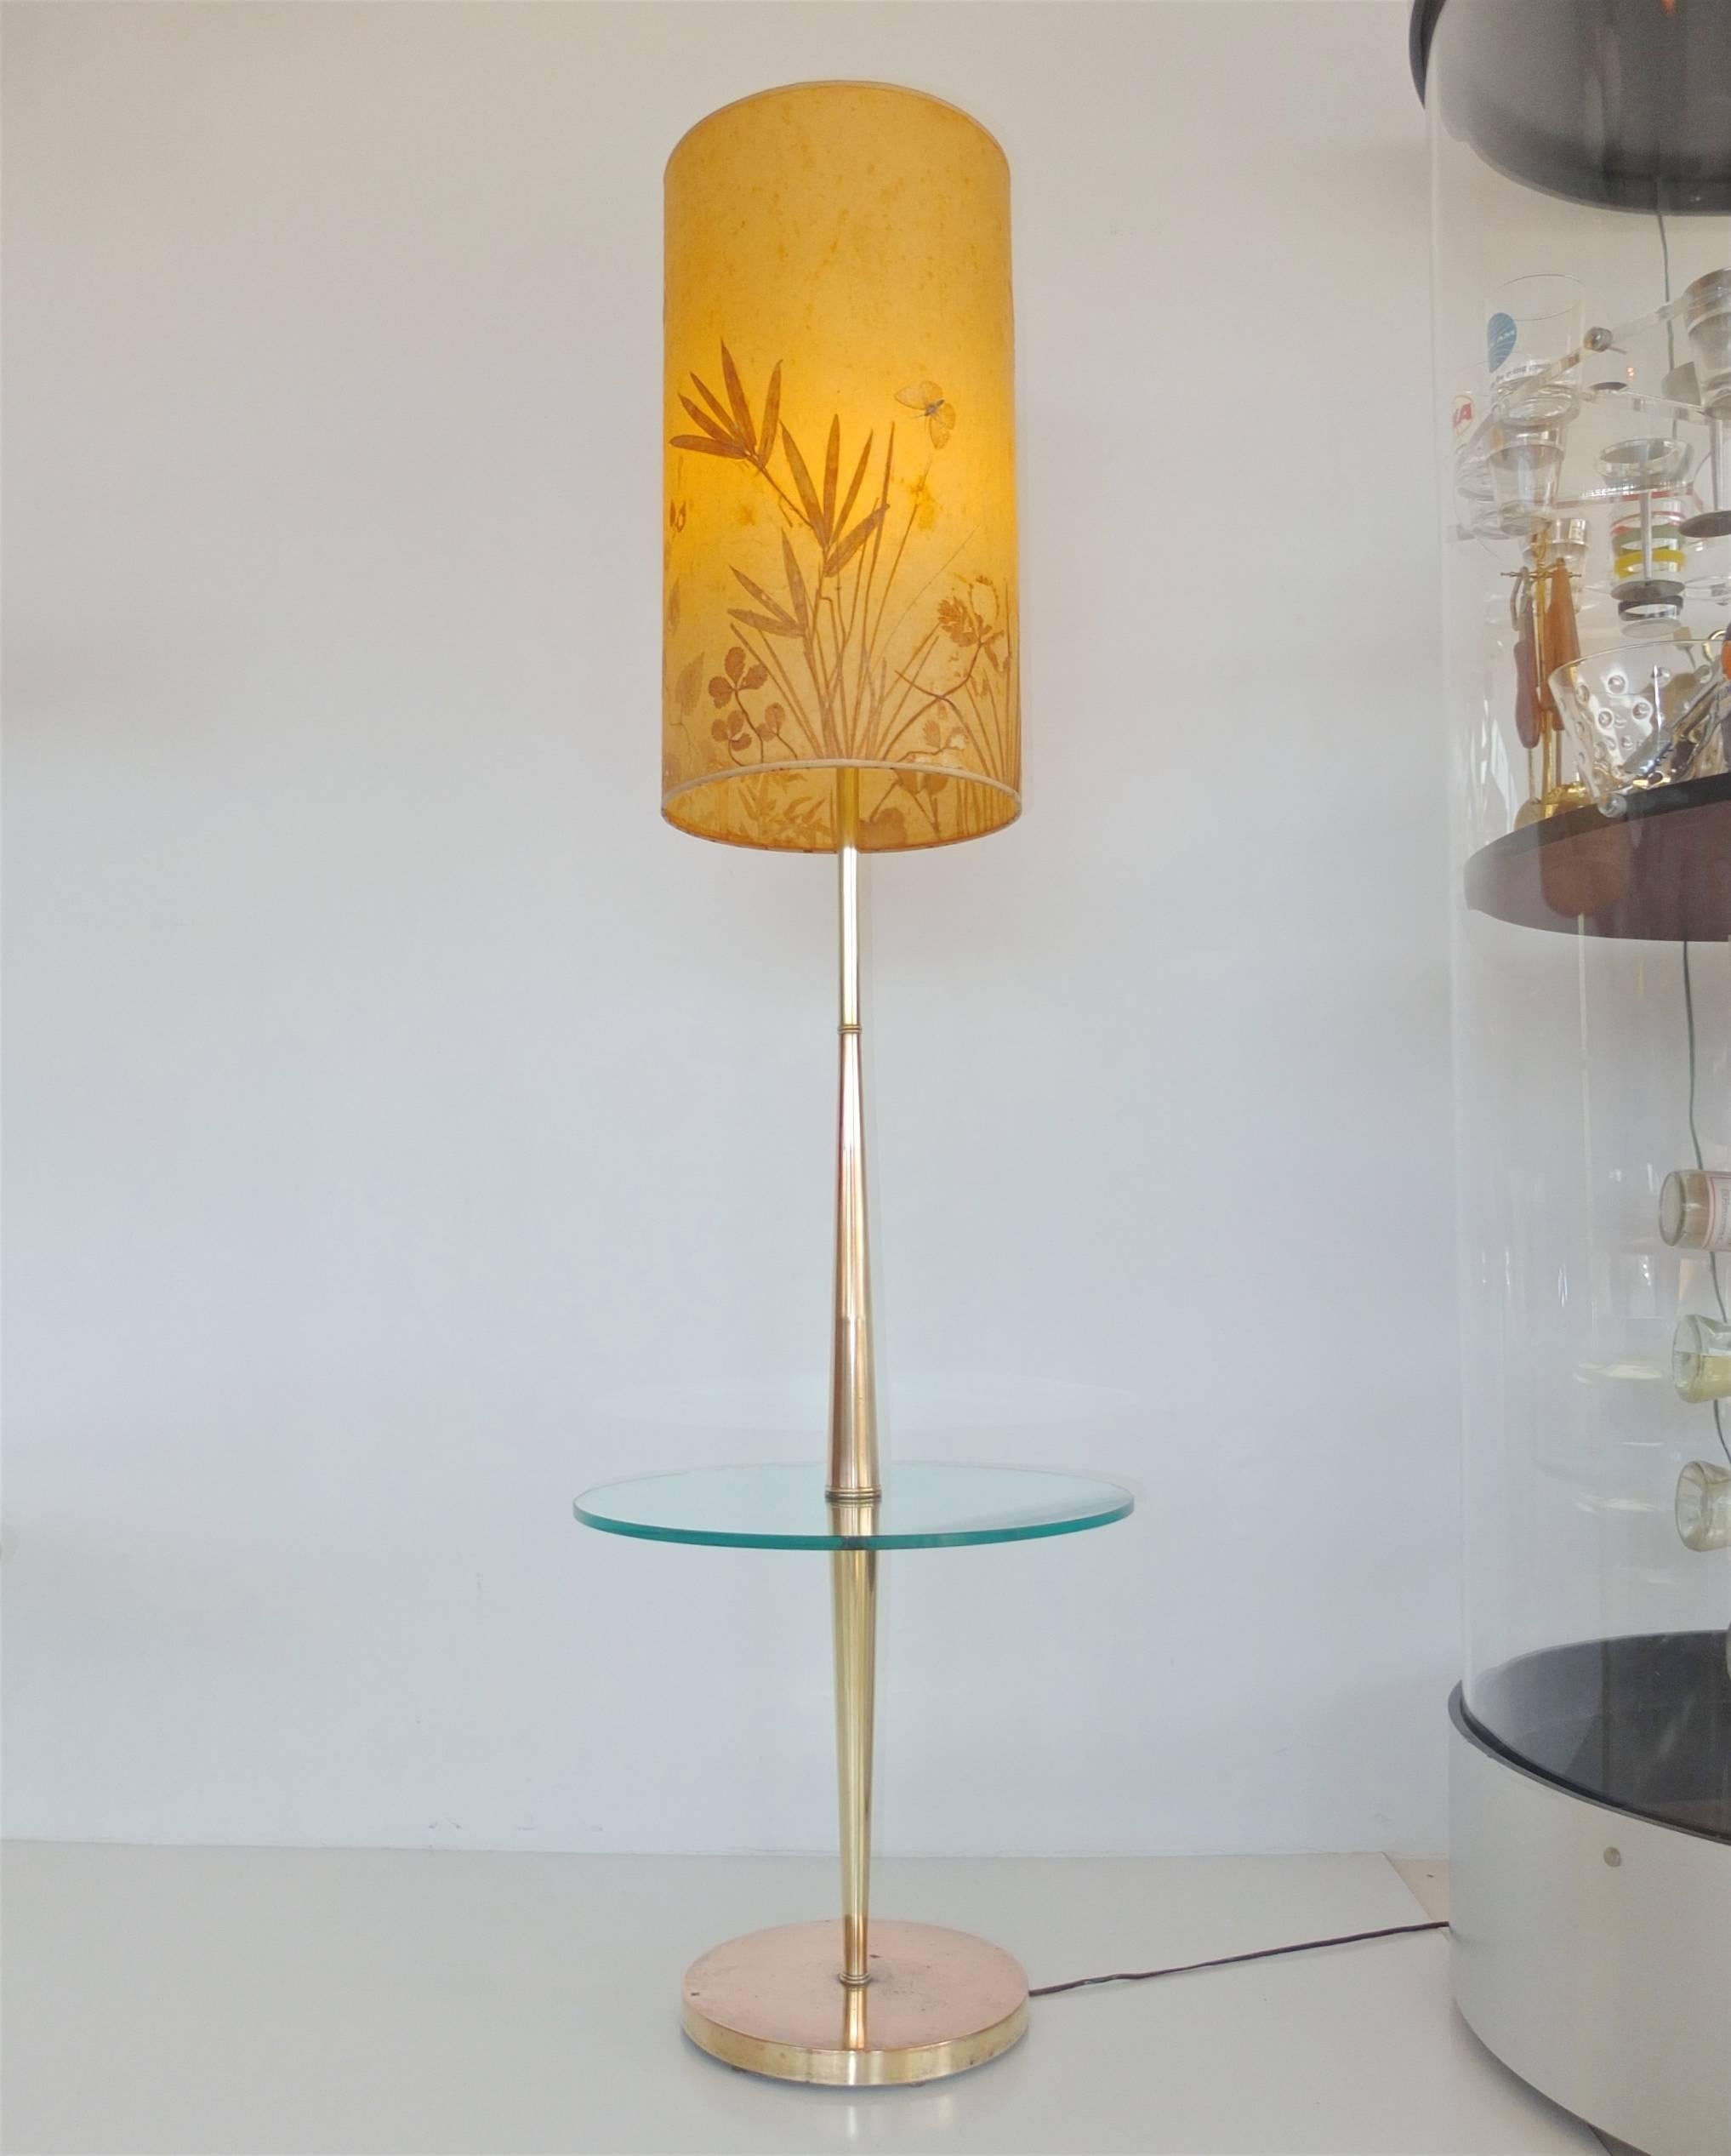 This is the sexiest one of these lamp tables I've ever seen. Note the quality of the double inverted and elongated tapered cones which form the stem. Where they intersect is the round glass disk table surface. The weighted base is made of copper.